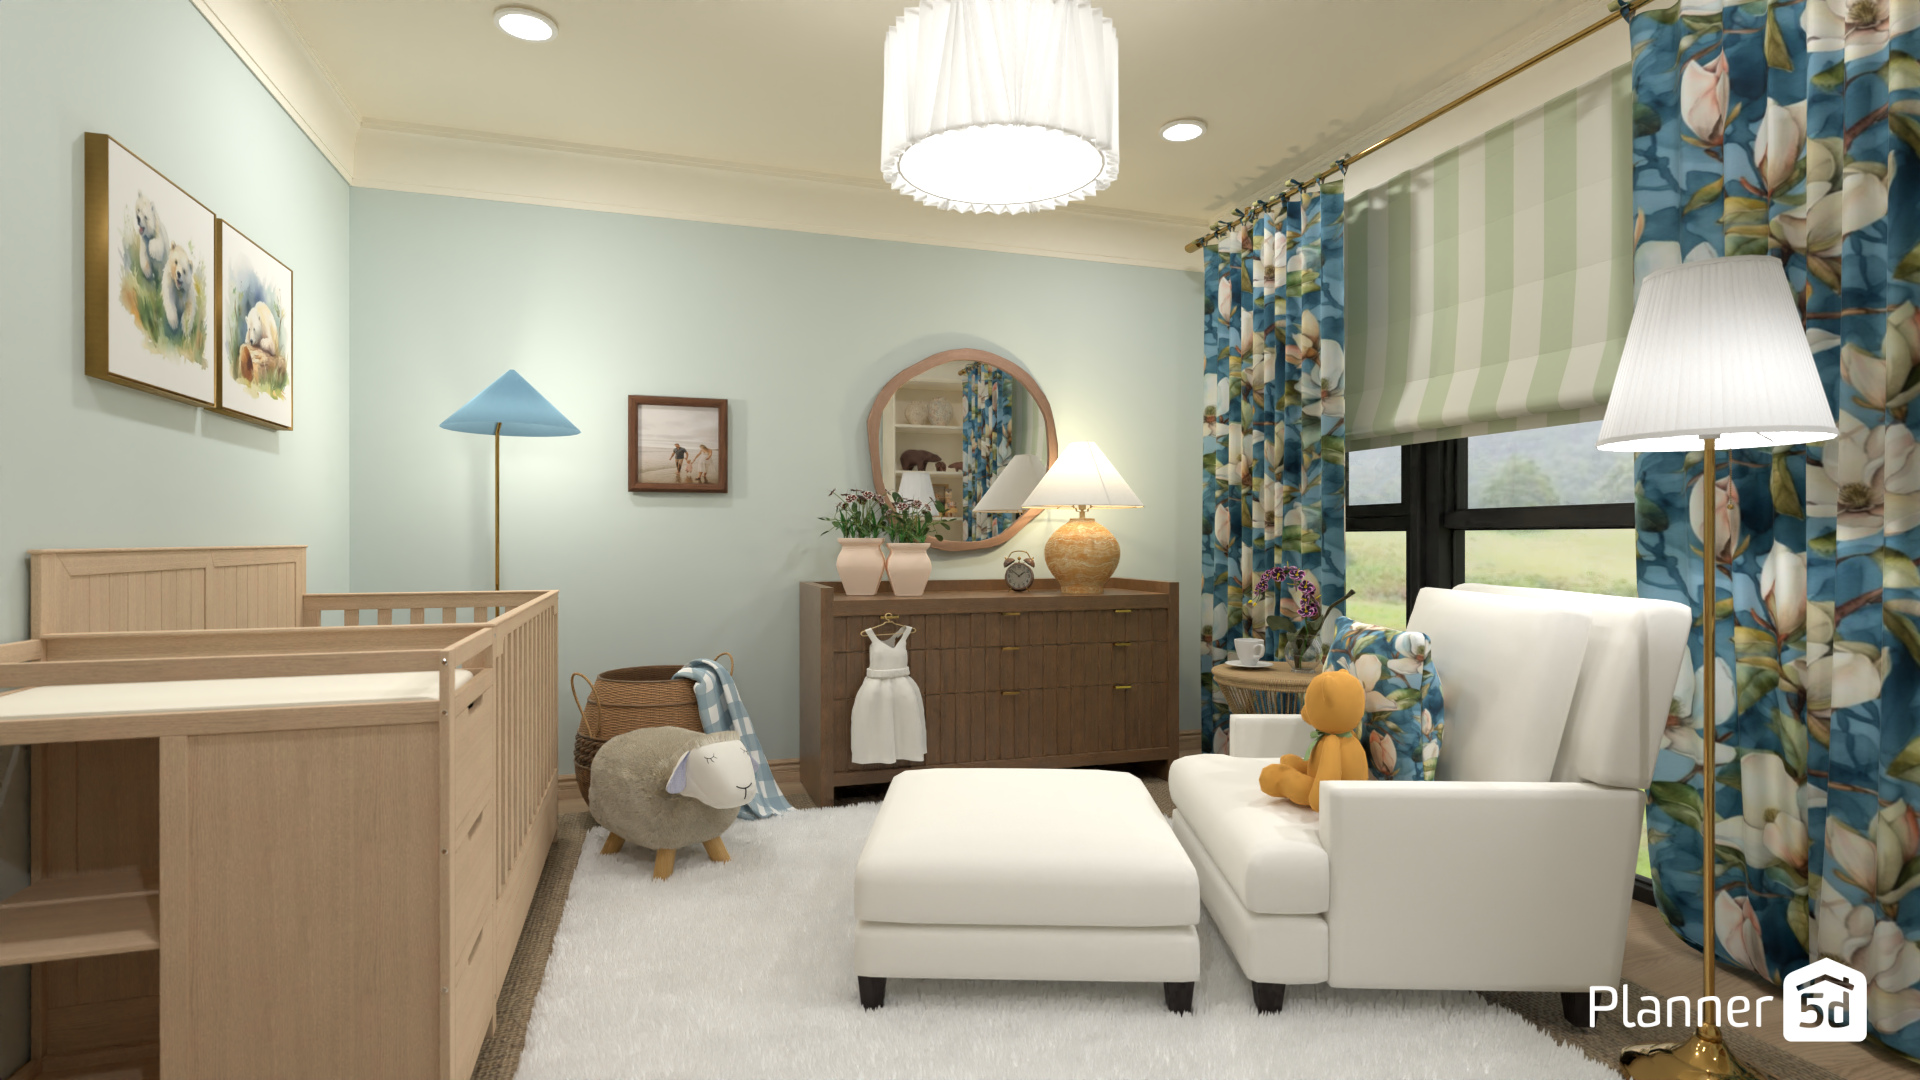 Nursery in SW paint colors 16391691 by Darina Doncheva image